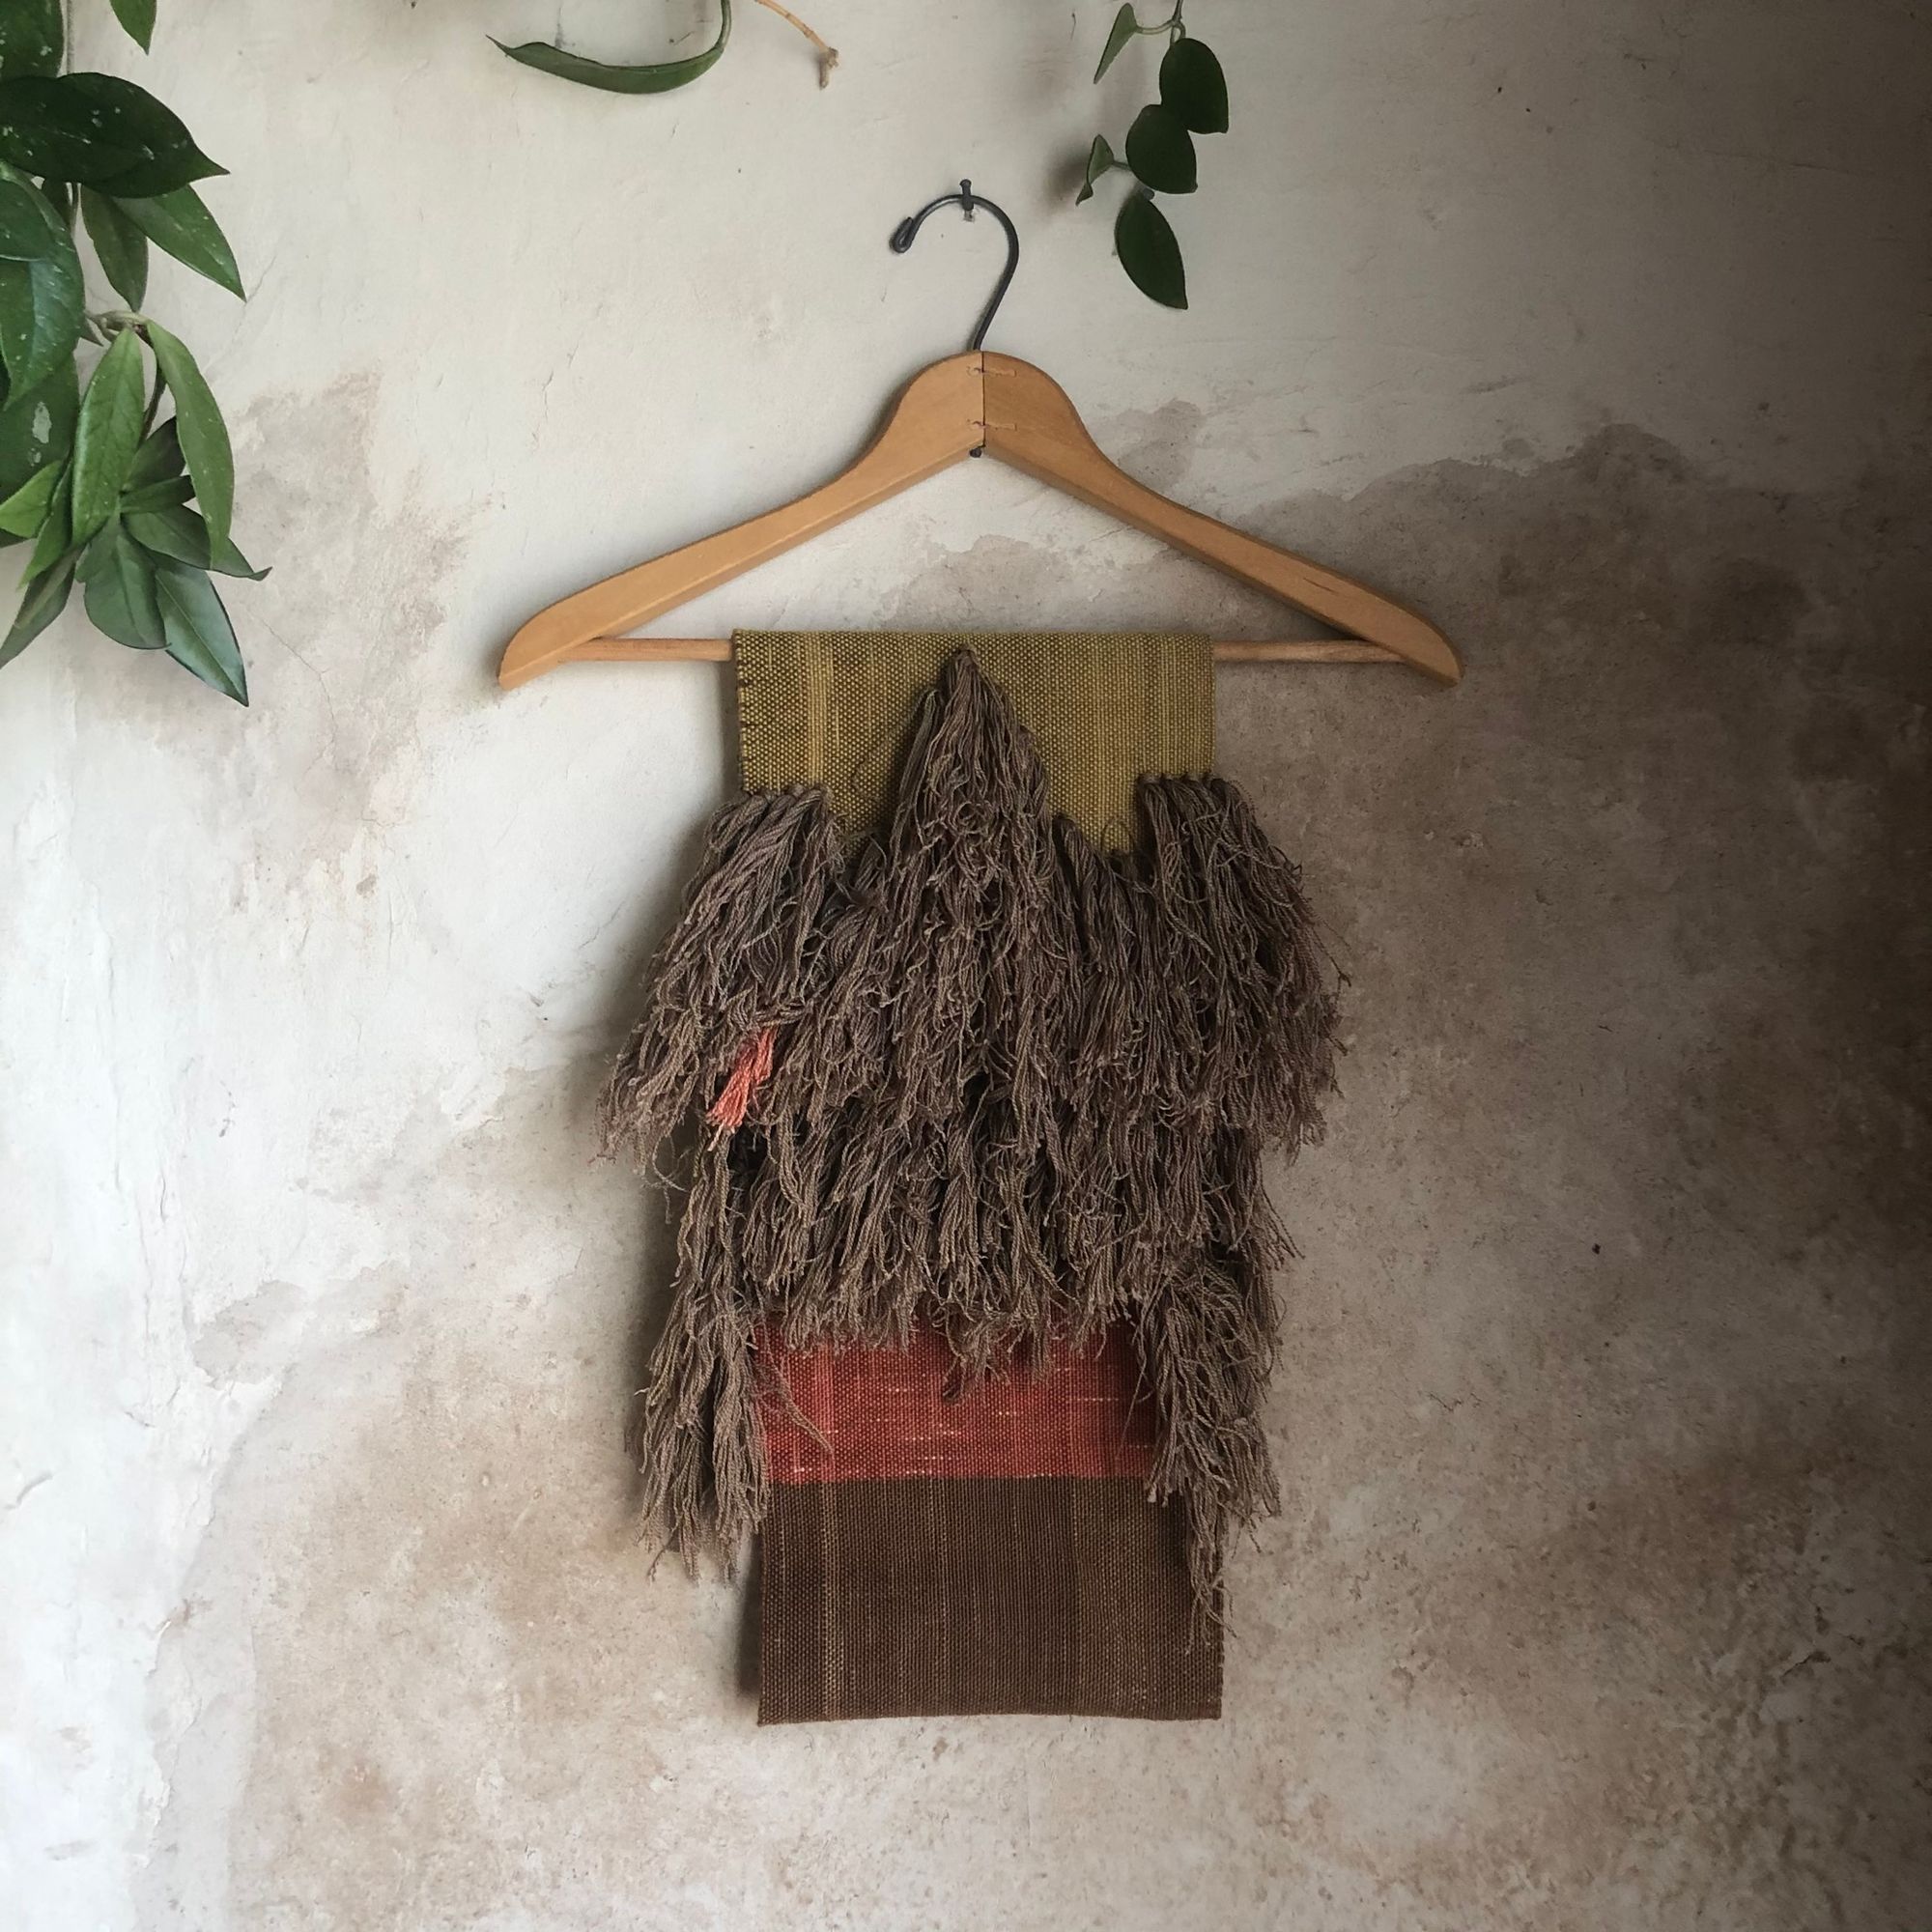 handwoven highly textured scarf that is mustard, brown, grey-blue and salmon colored, on a hanger against a wall